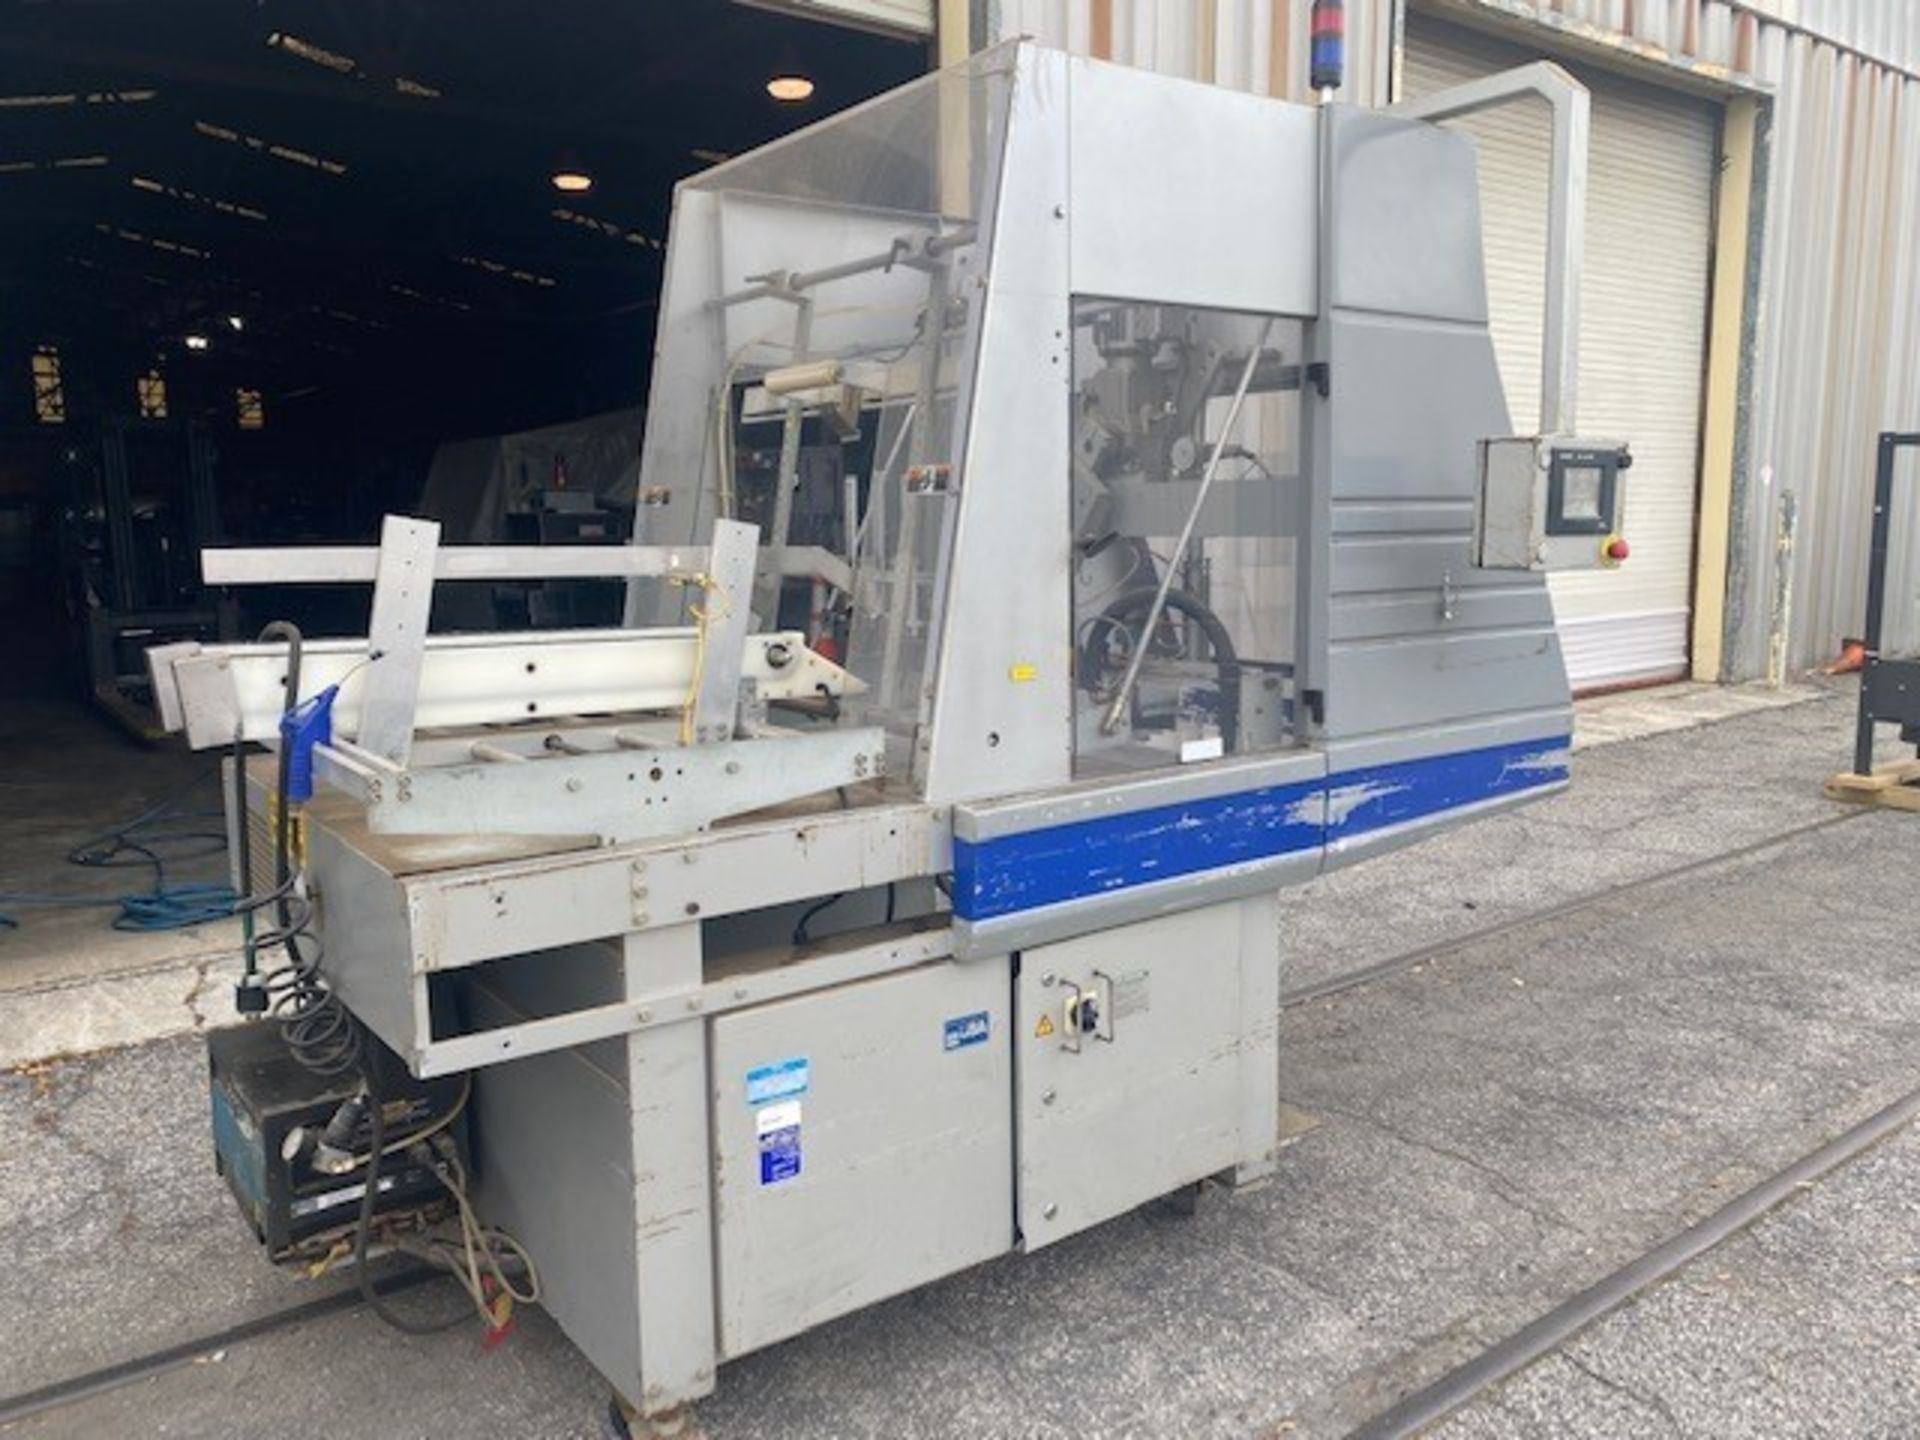 DOBOY 7510 Tray Former with Nordson 3100 Hot Melt Glue (Located Charleston, SC) - Image 2 of 4